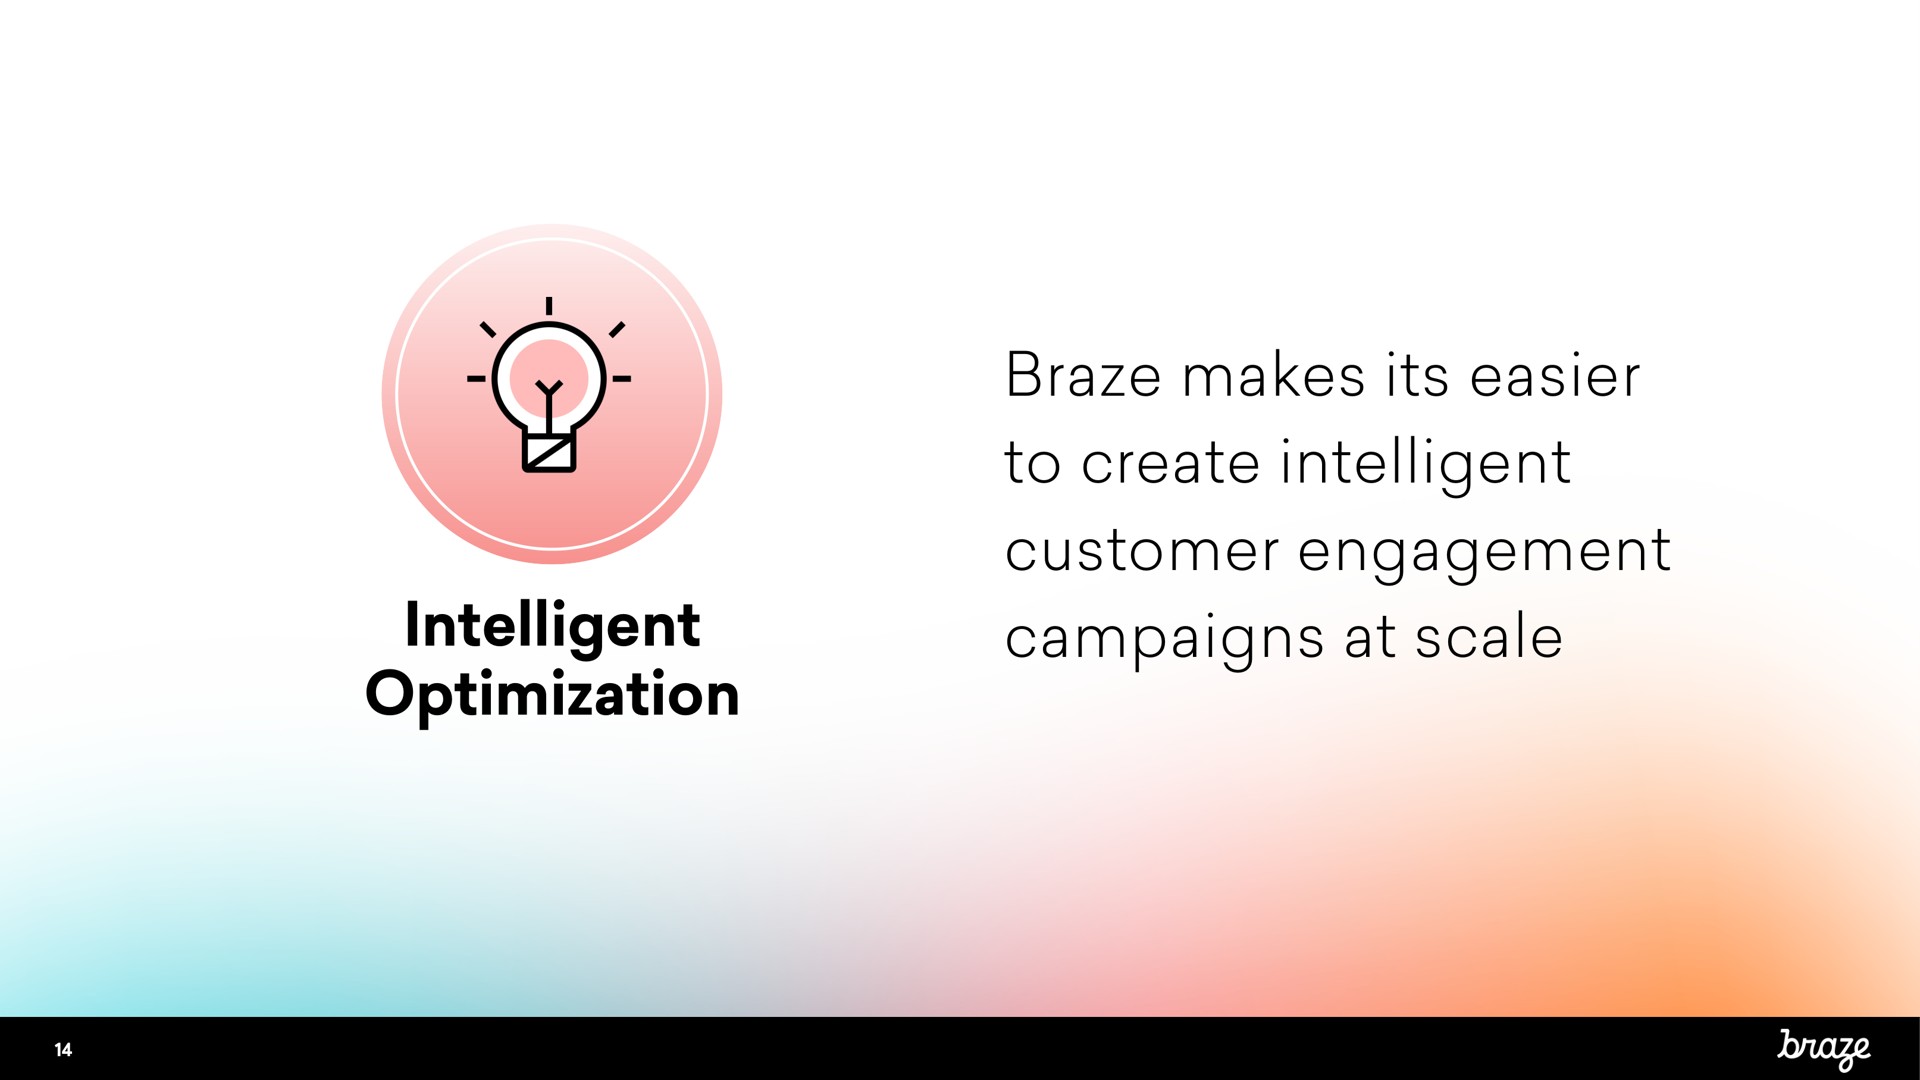 braze makes its easier to create intelligent customer engagement campaigns at scale intelligent optimization | Braze